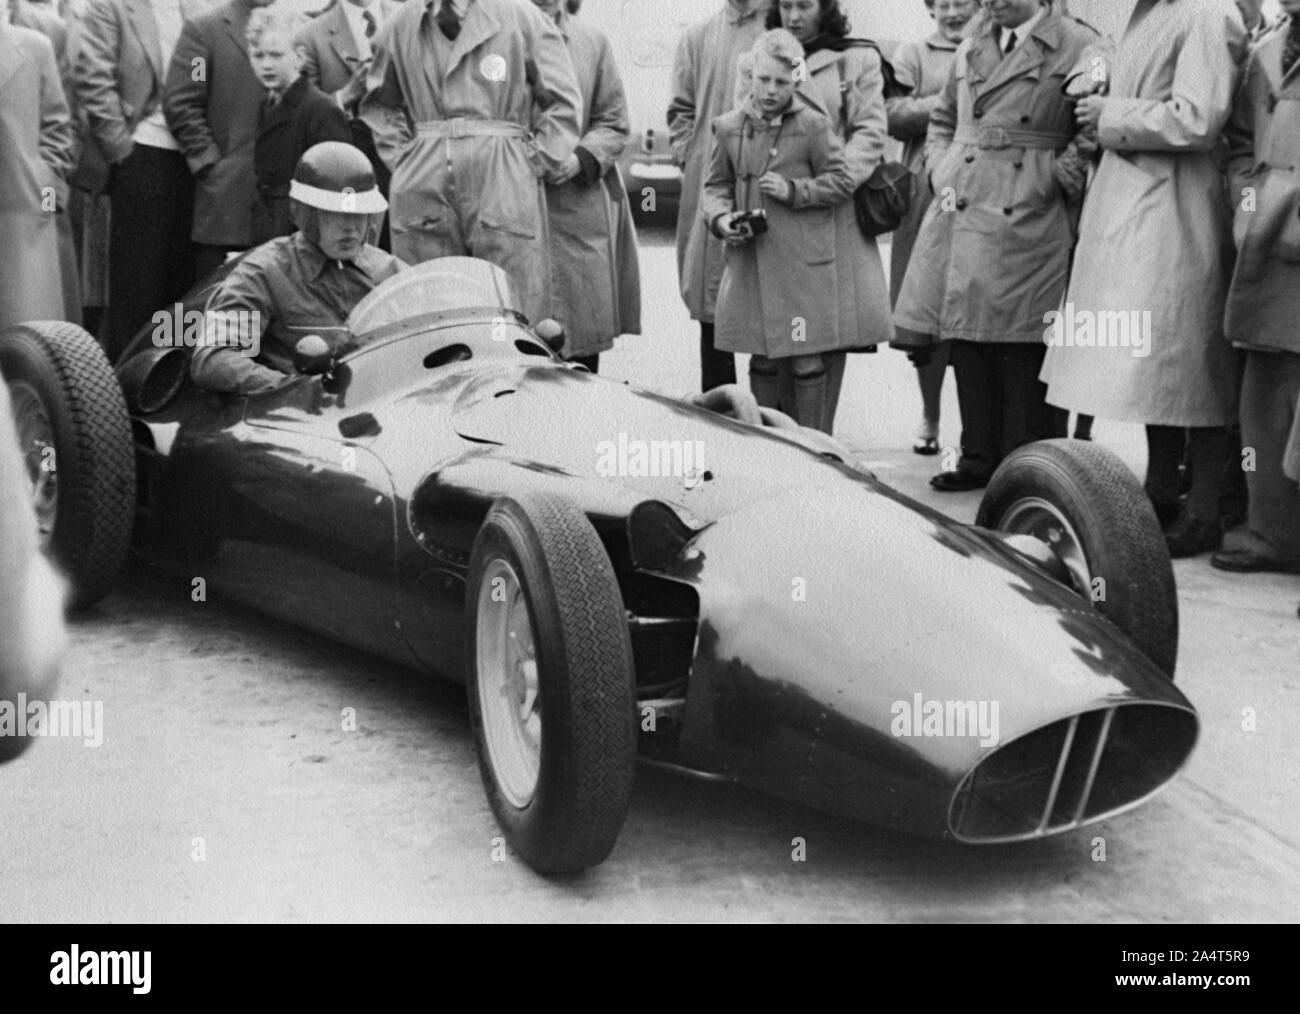 Mike Hawthorn in BRM 1956. Stock Photo